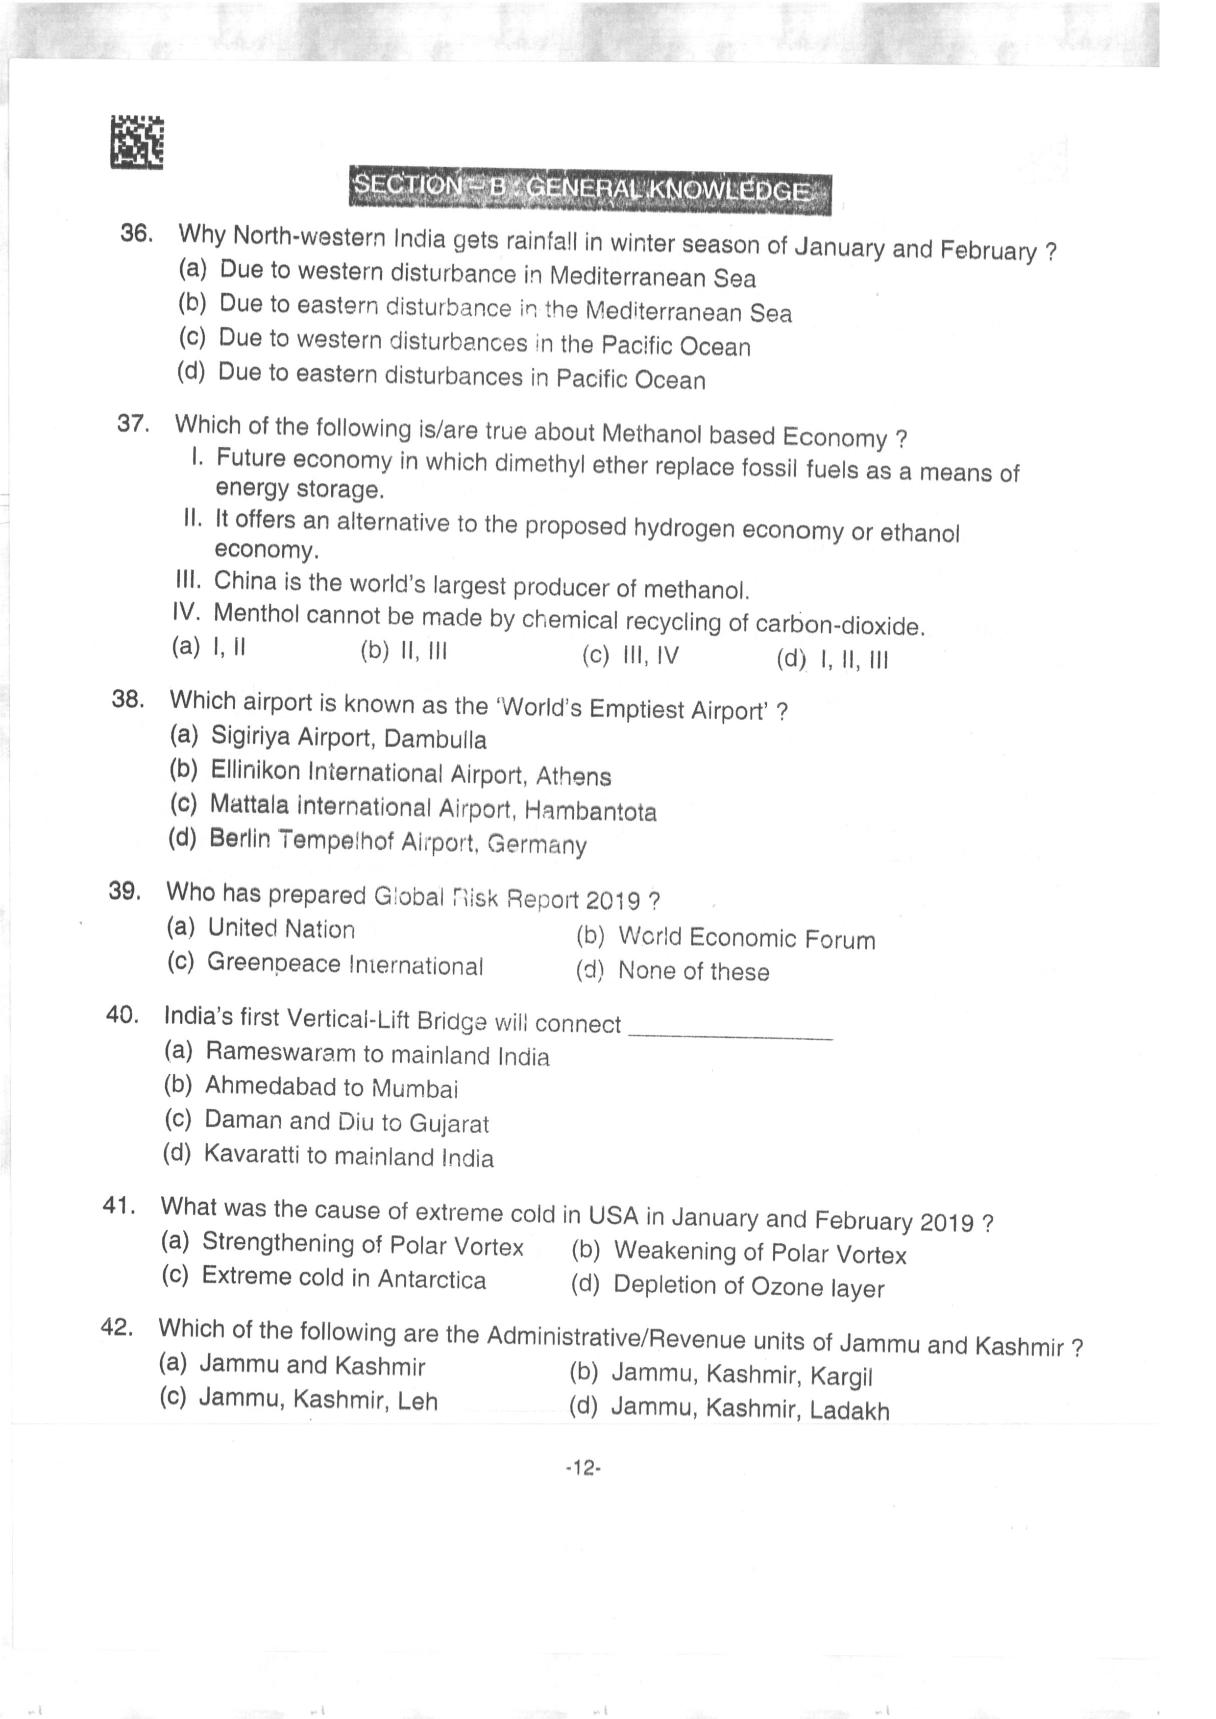 AILET 2019 Question Paper for BA LLB - Page 12